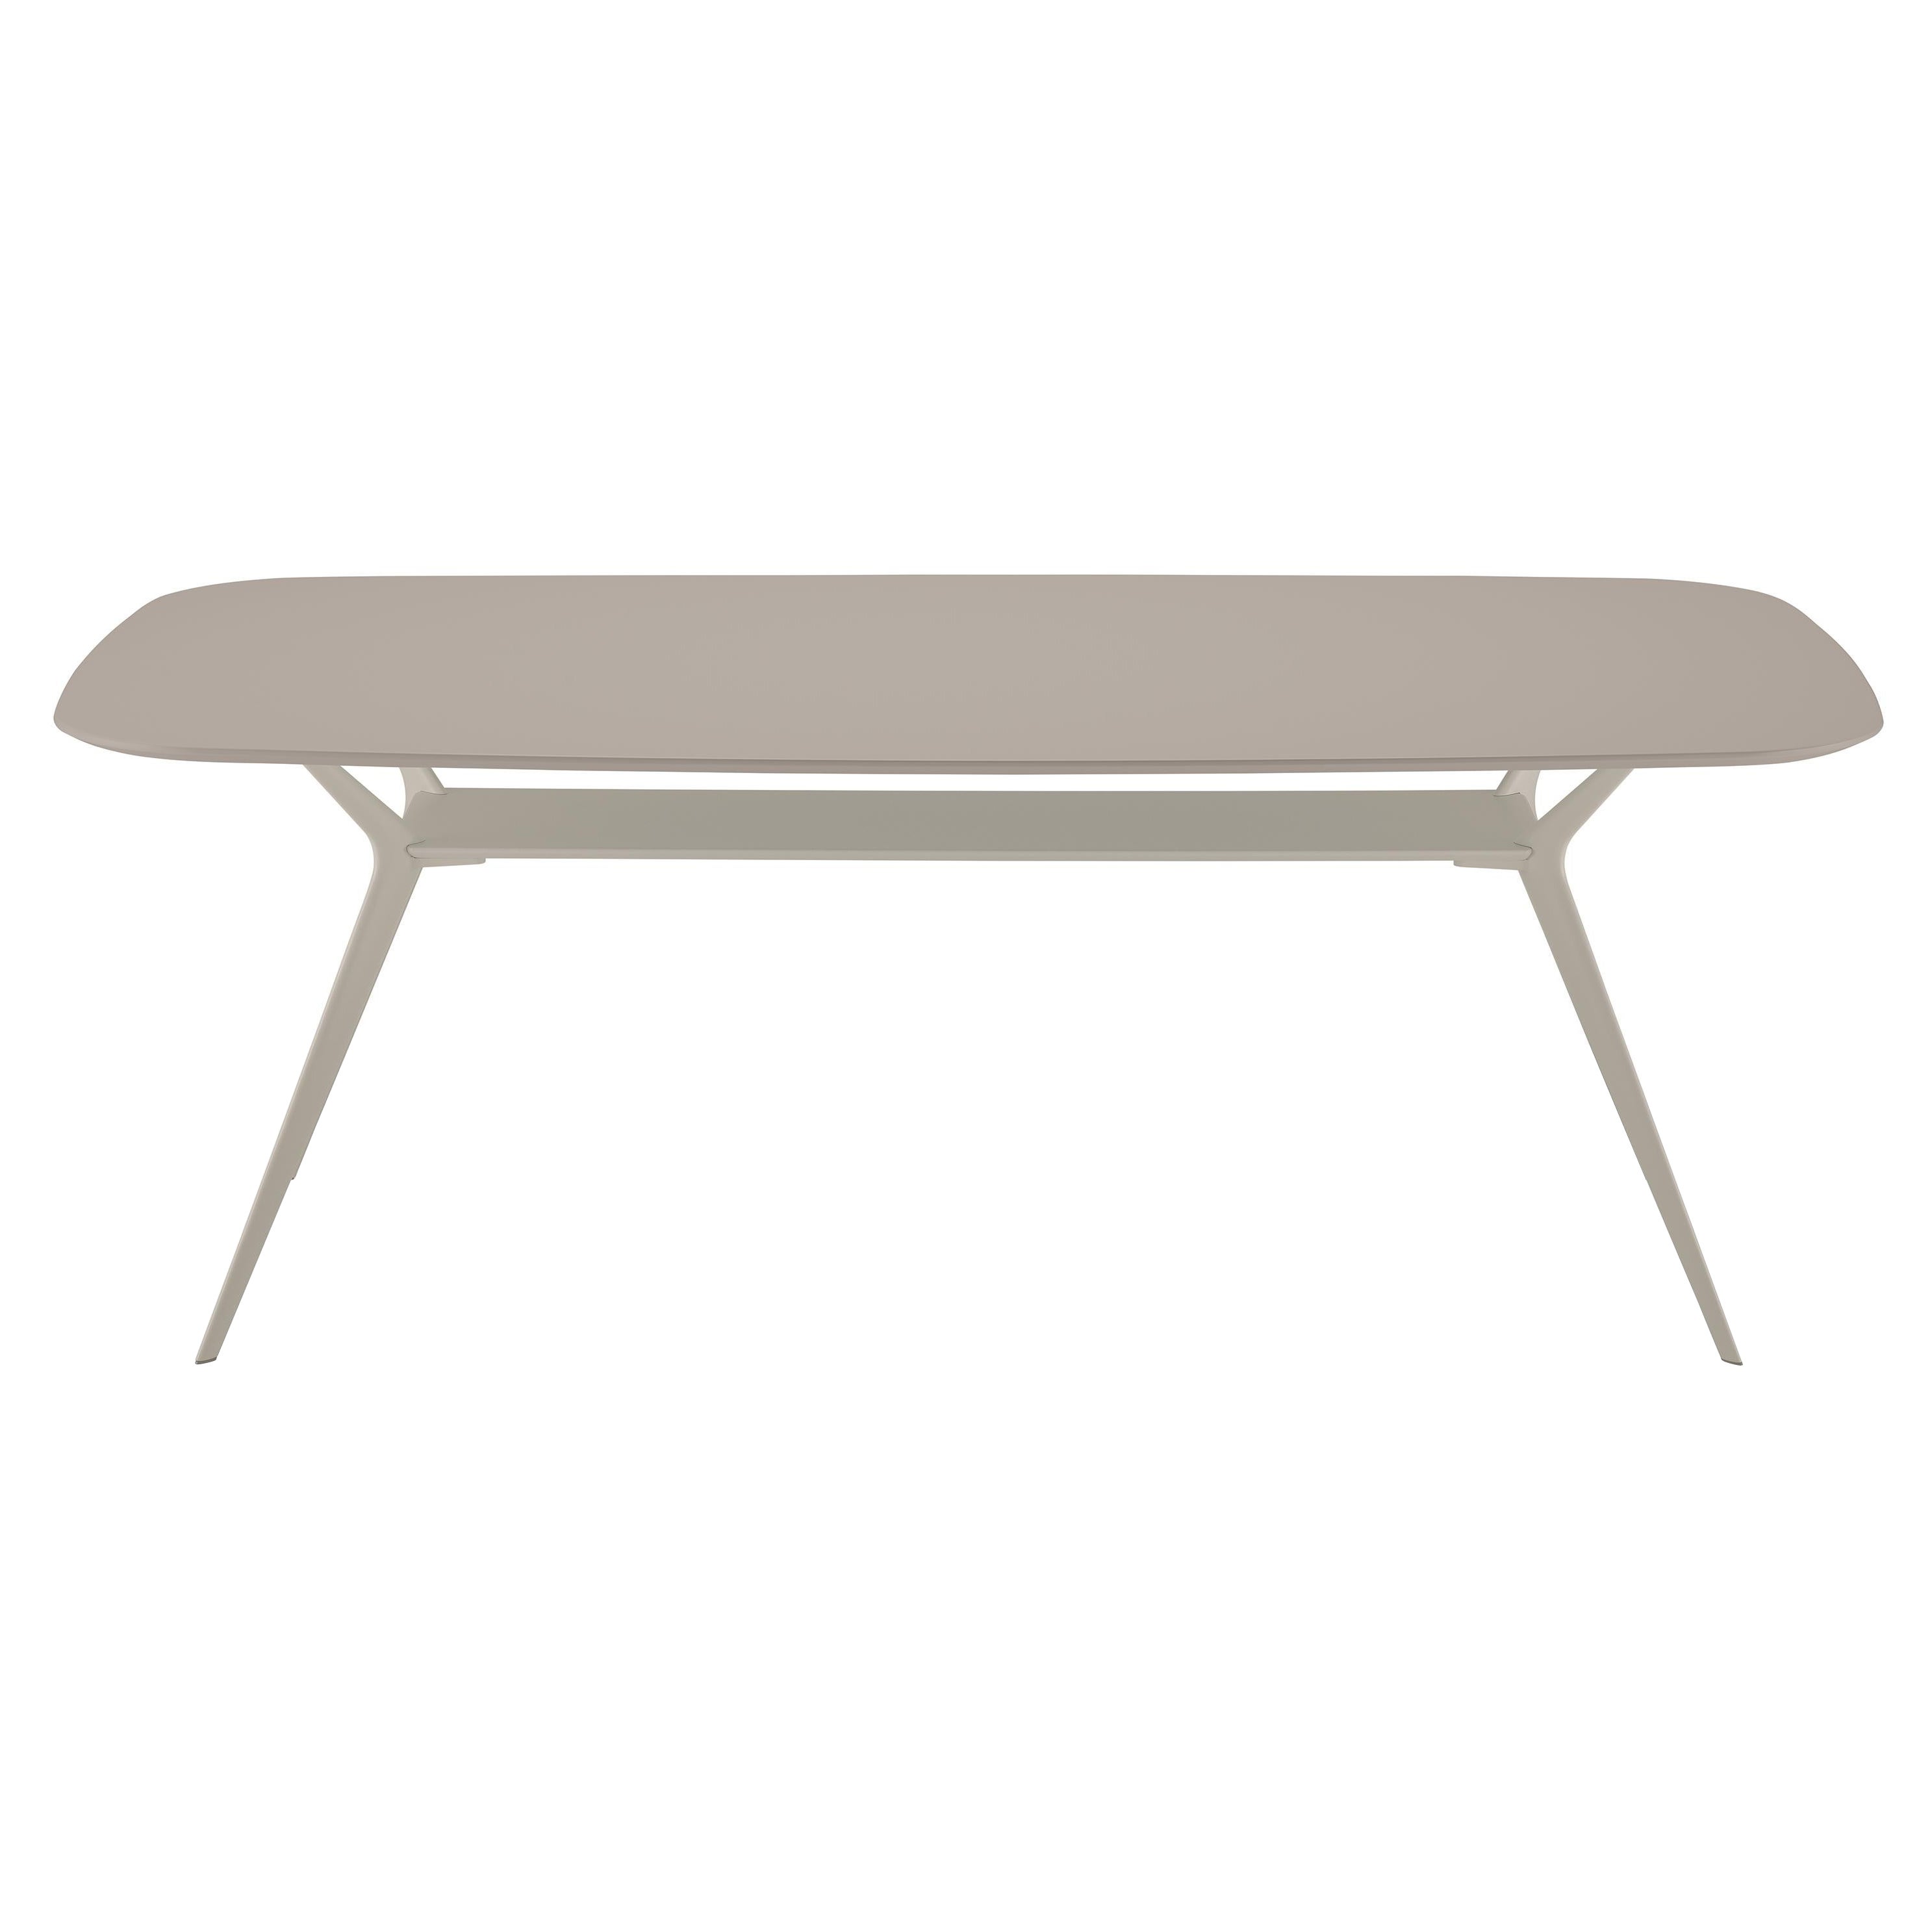 Alias Biplane 40D Table in Sand MDF Top with Sand Lacquered Aluminium Frame For Sale